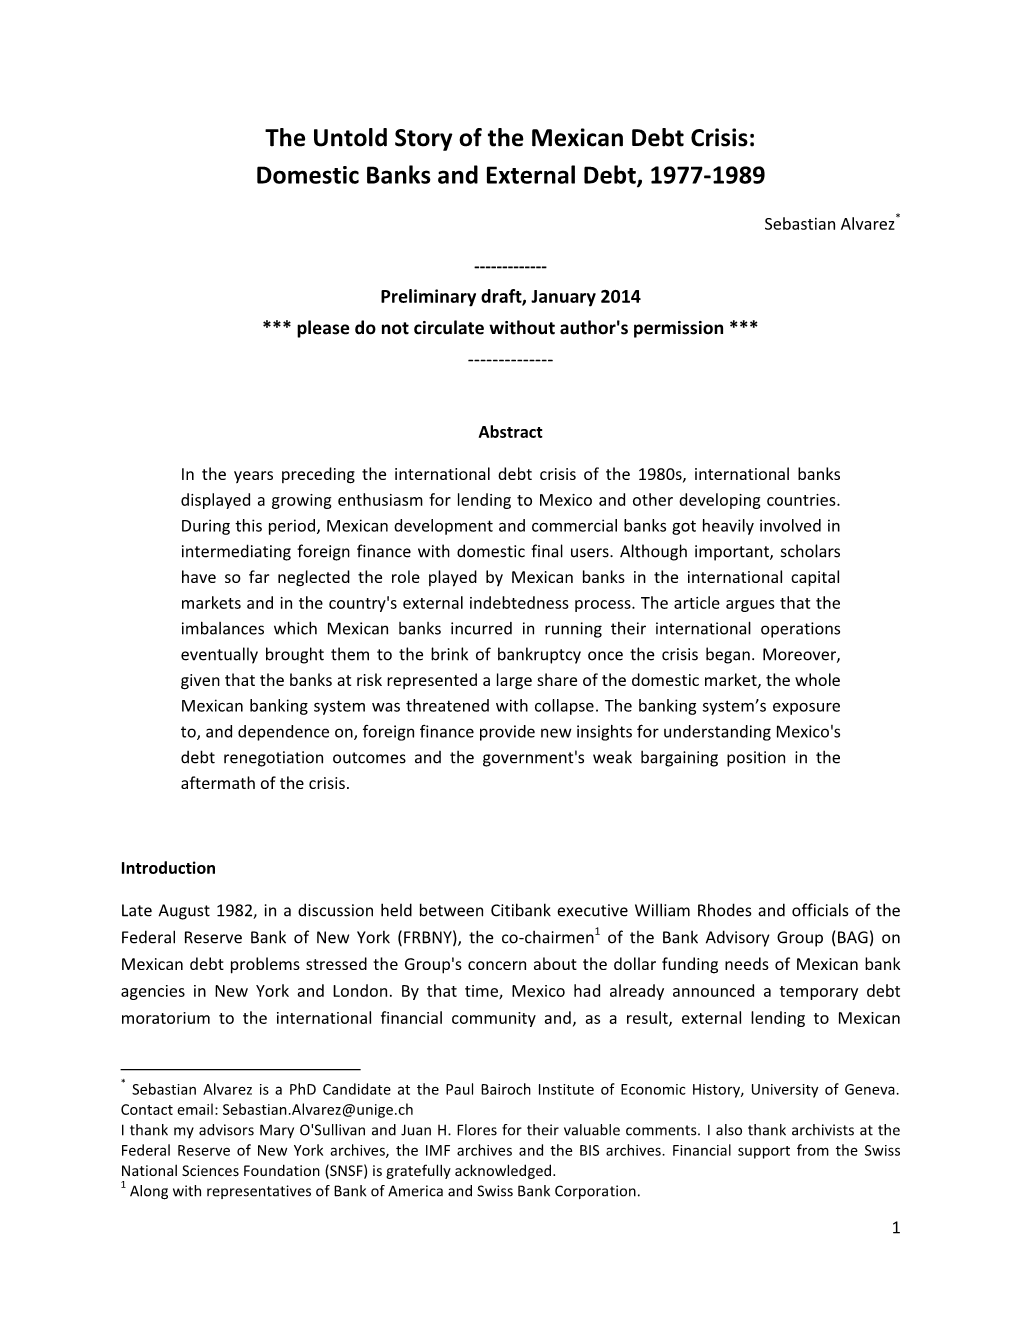 The Untold Story of the Mexican Debt Crisis: Domestic Banks and External Debt, 1977-1989